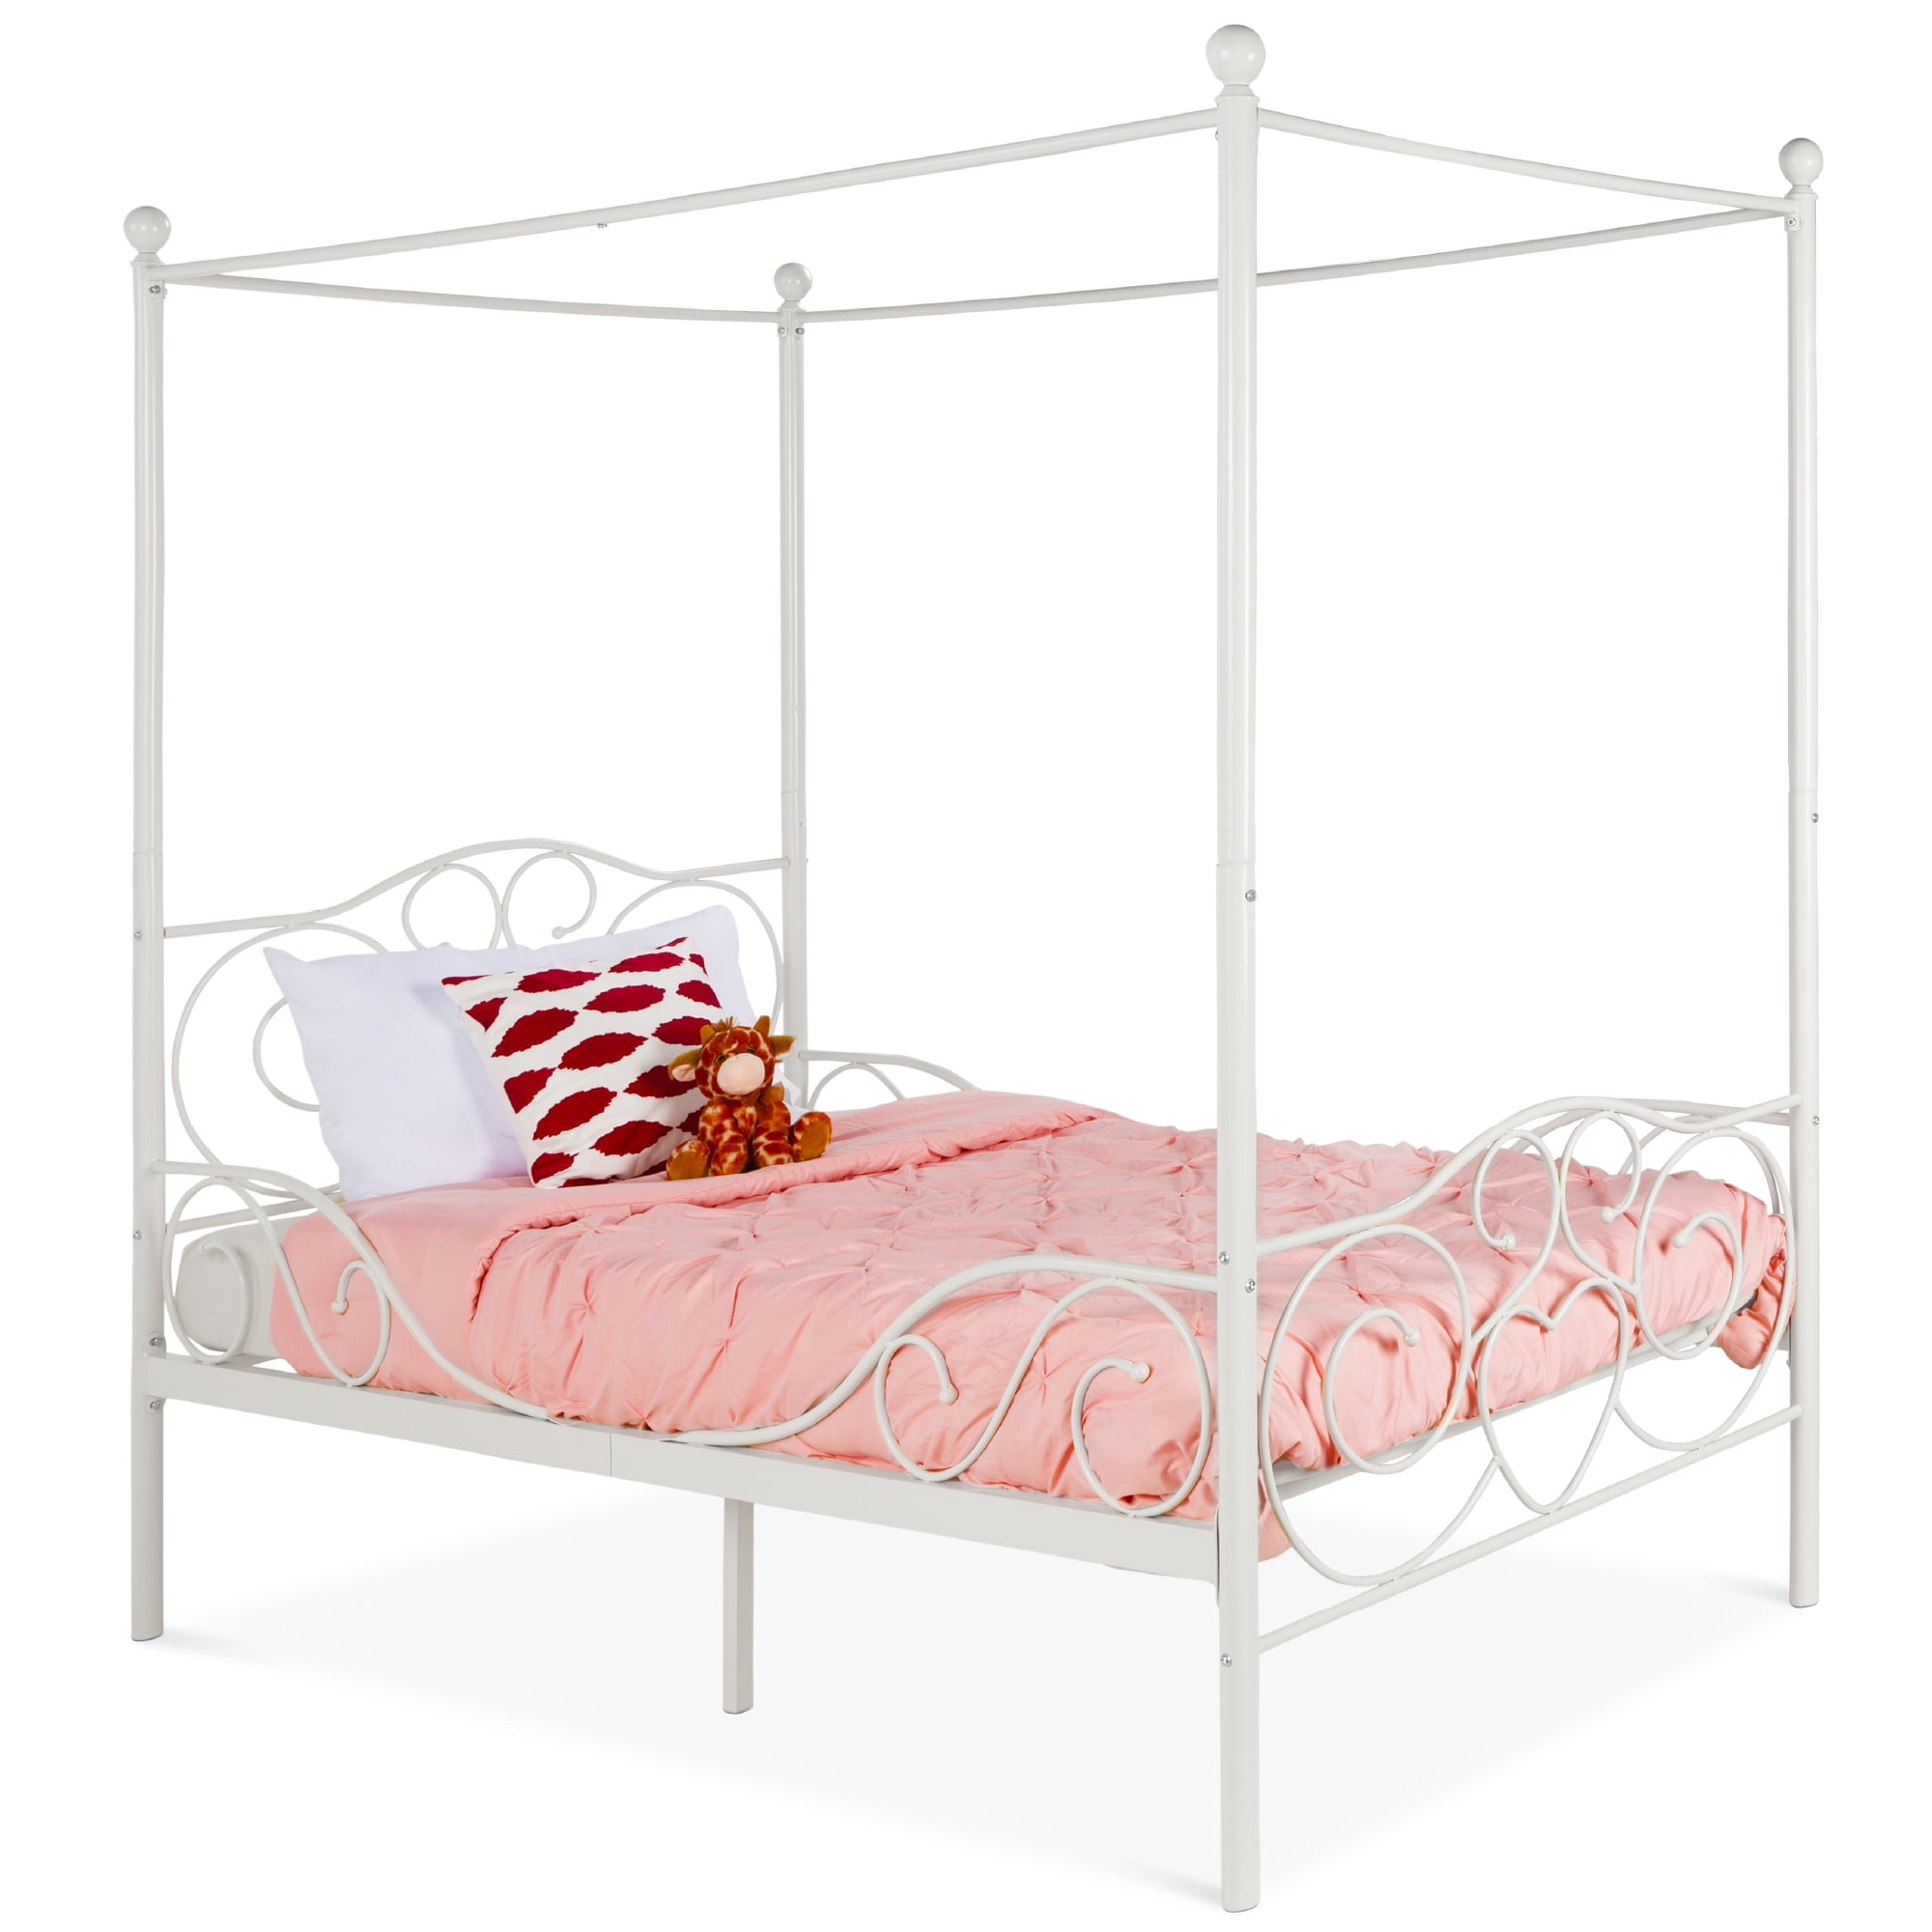 Details about   Dhp Canopy Bed With Sturdy Bed Frame Twin Size Metal Pink,White,Gold Pewter 